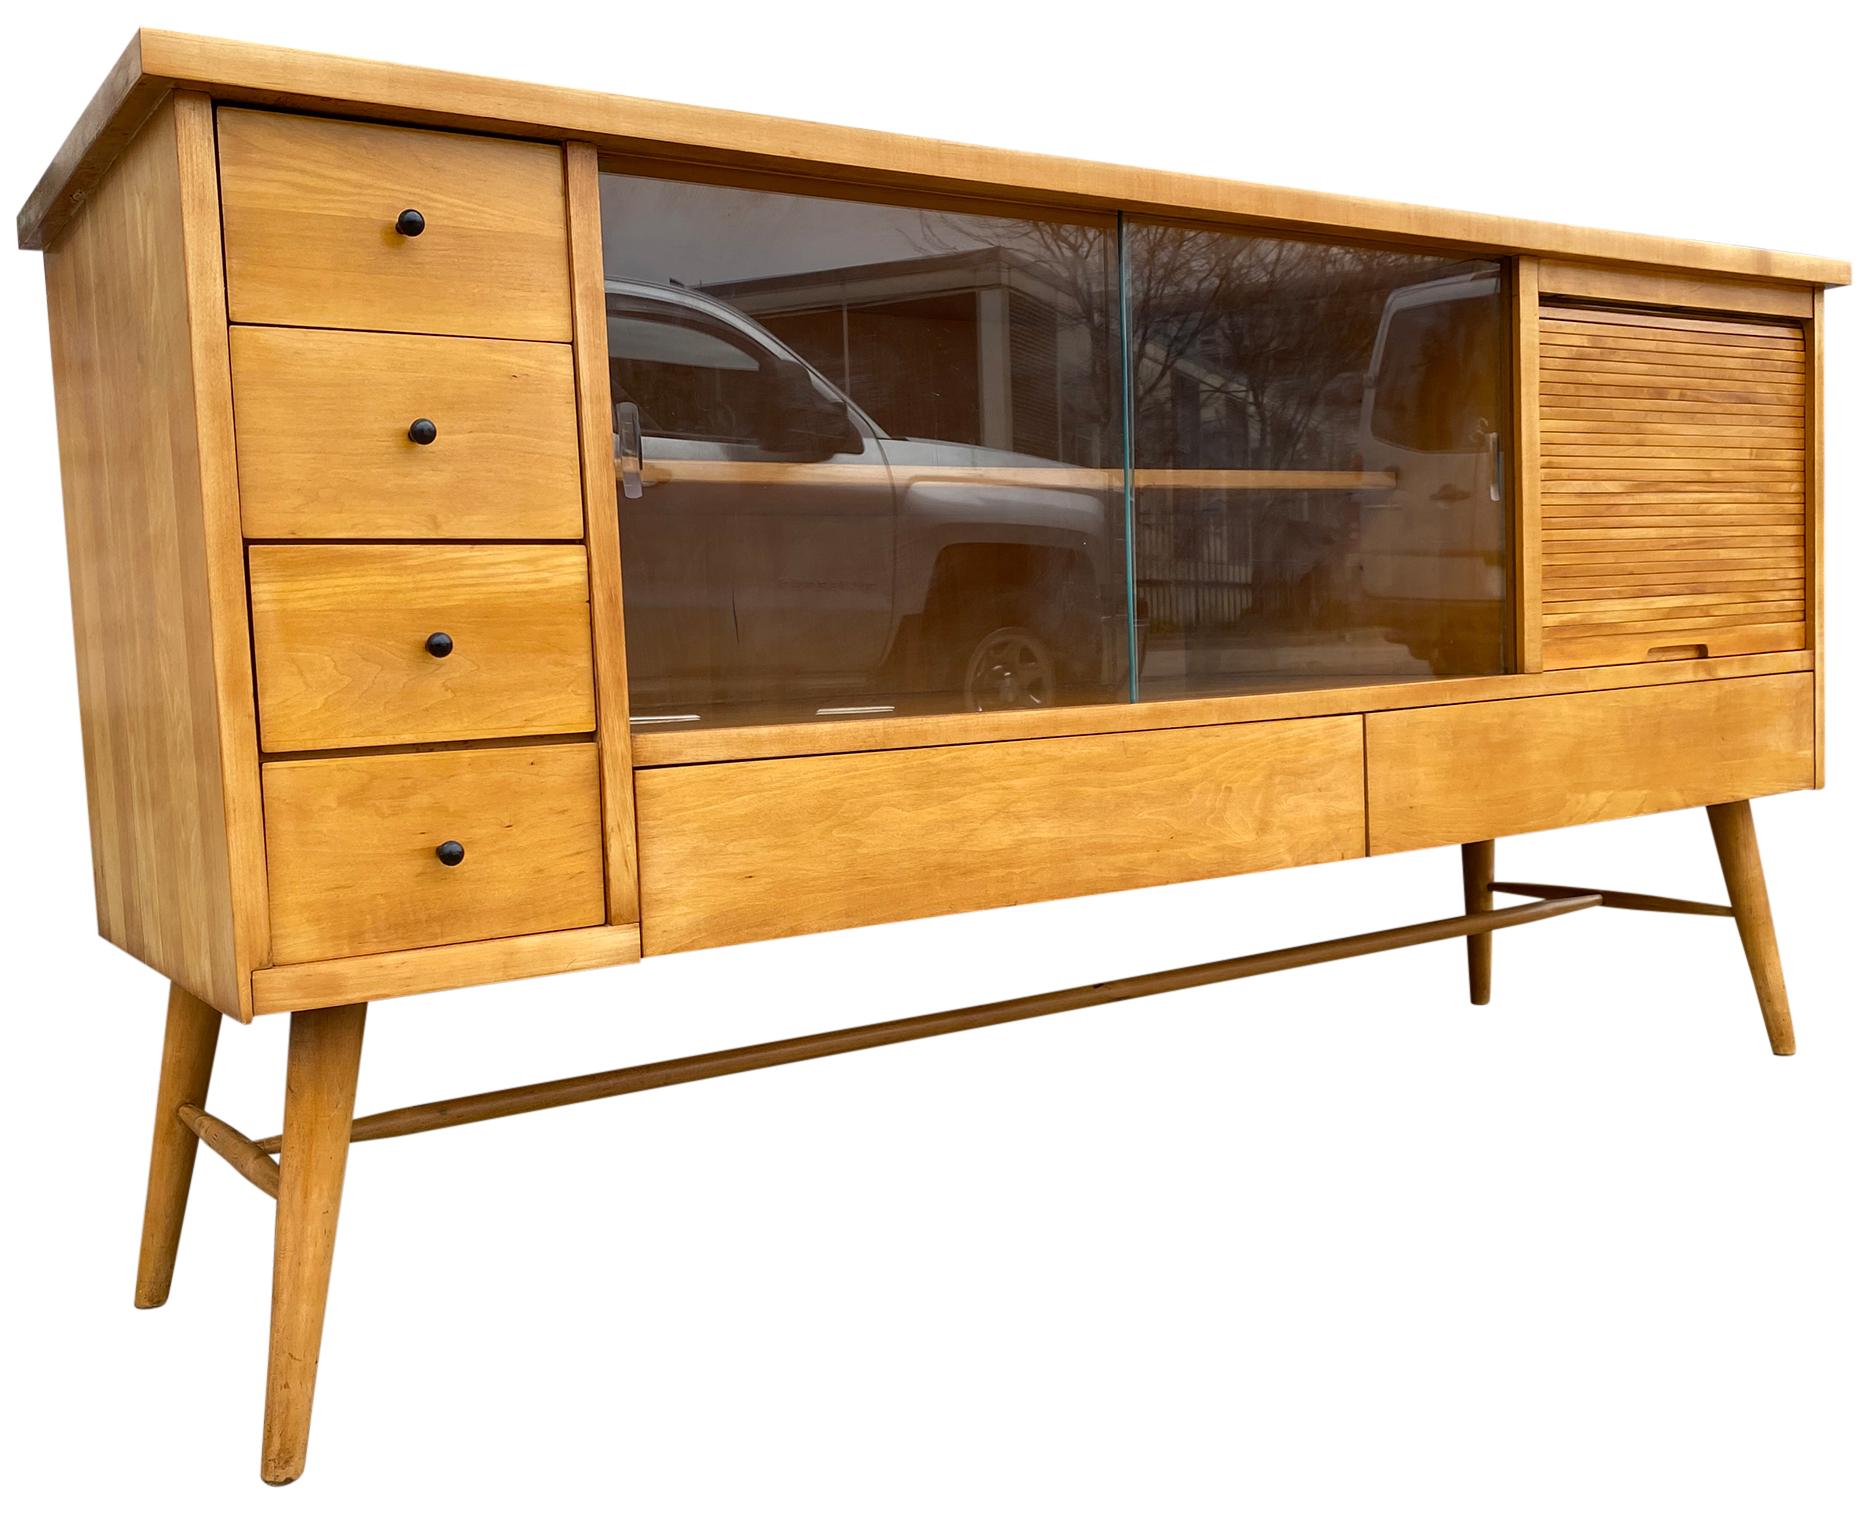 Very Rare Mid-Century Modern Maple Predictor Credenza by Paul McCobb for O’hearn For Sale 6